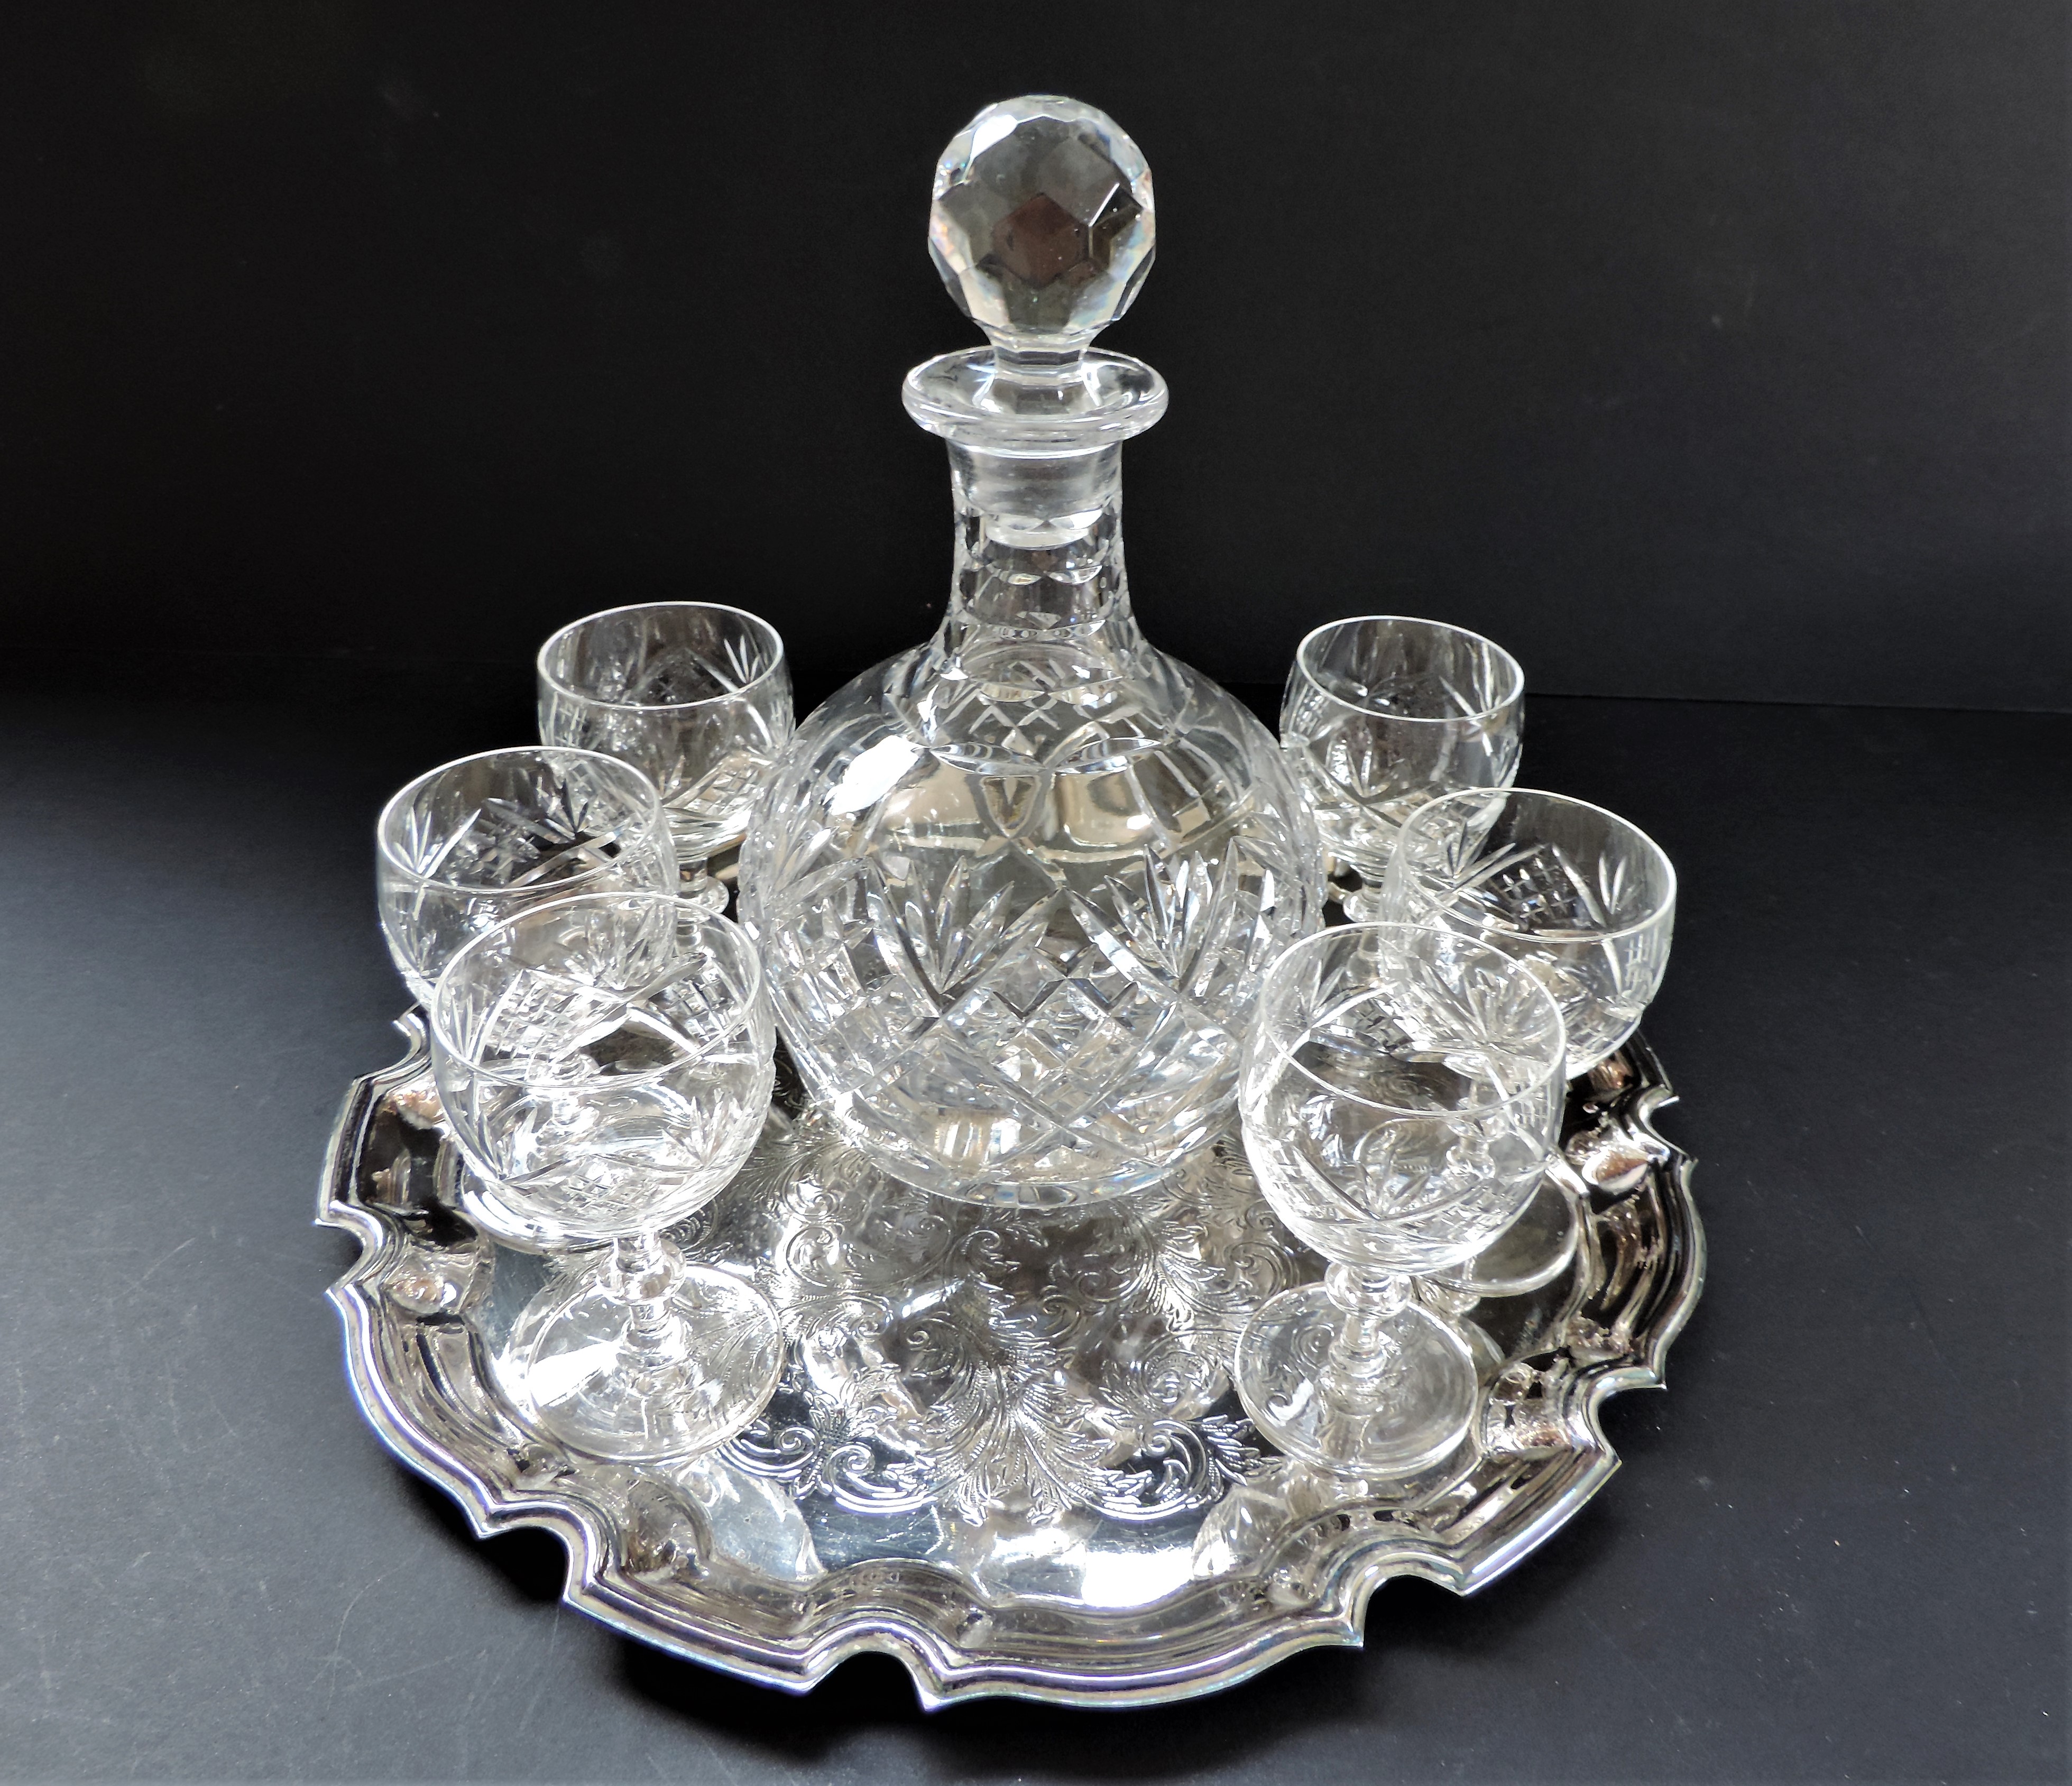 Crystal Decanter and Glasses on Silver Plate Serving Tray - Image 3 of 12